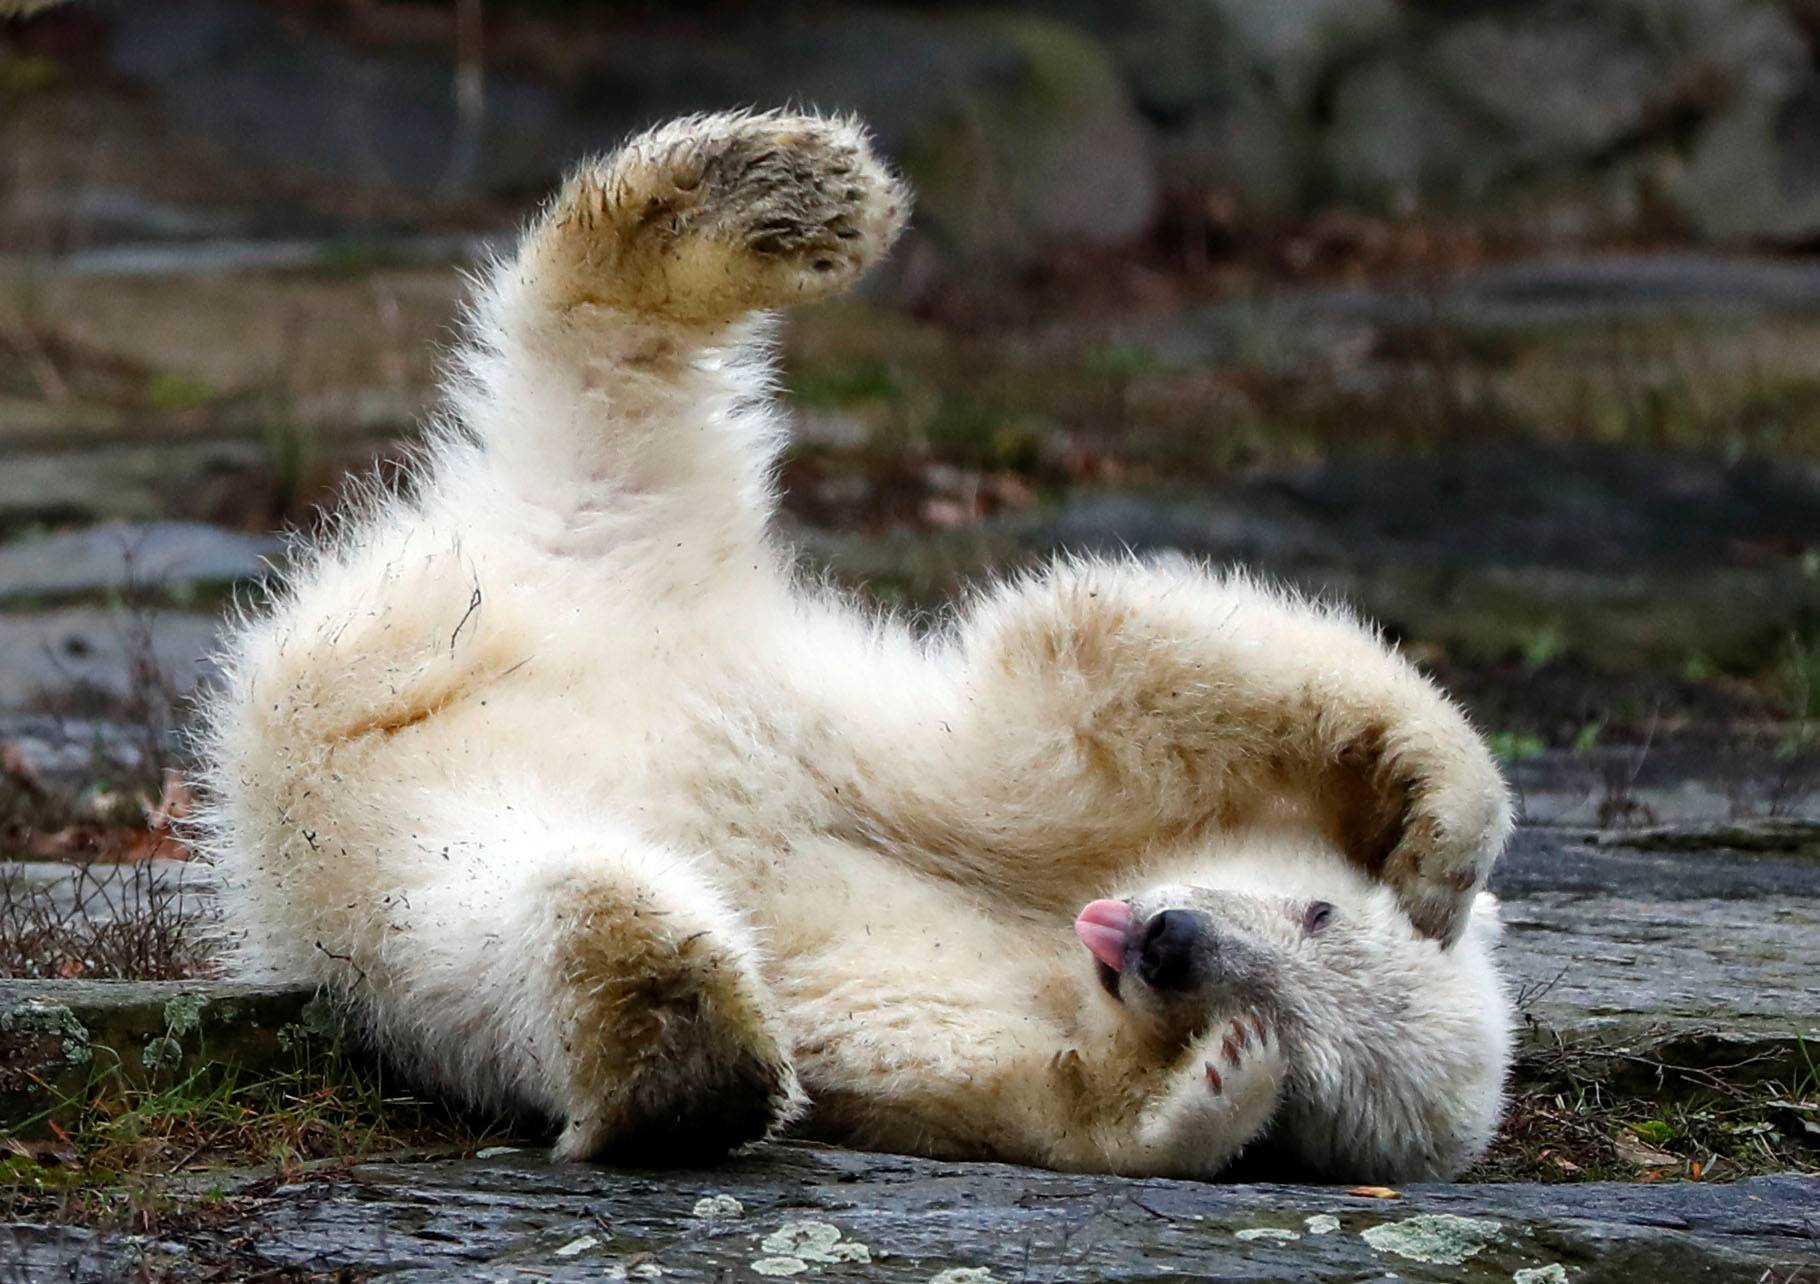 Female polar bear cub, born on December 1, 2018, is seen during her first official presentation for the media at Tierpark Berlin zoo in Berlin